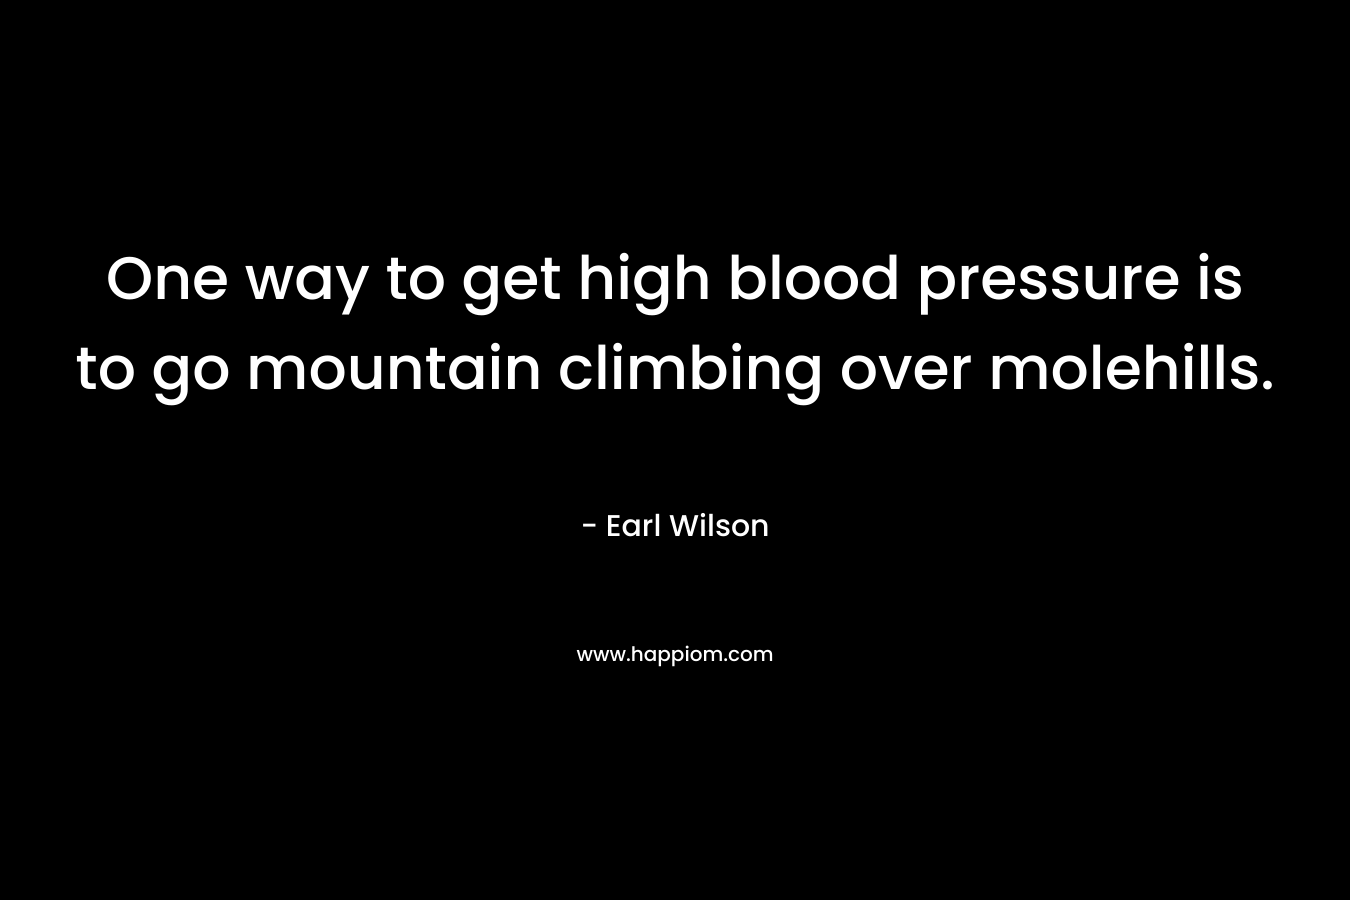 One way to get high blood pressure is to go mountain climbing over molehills. – Earl Wilson